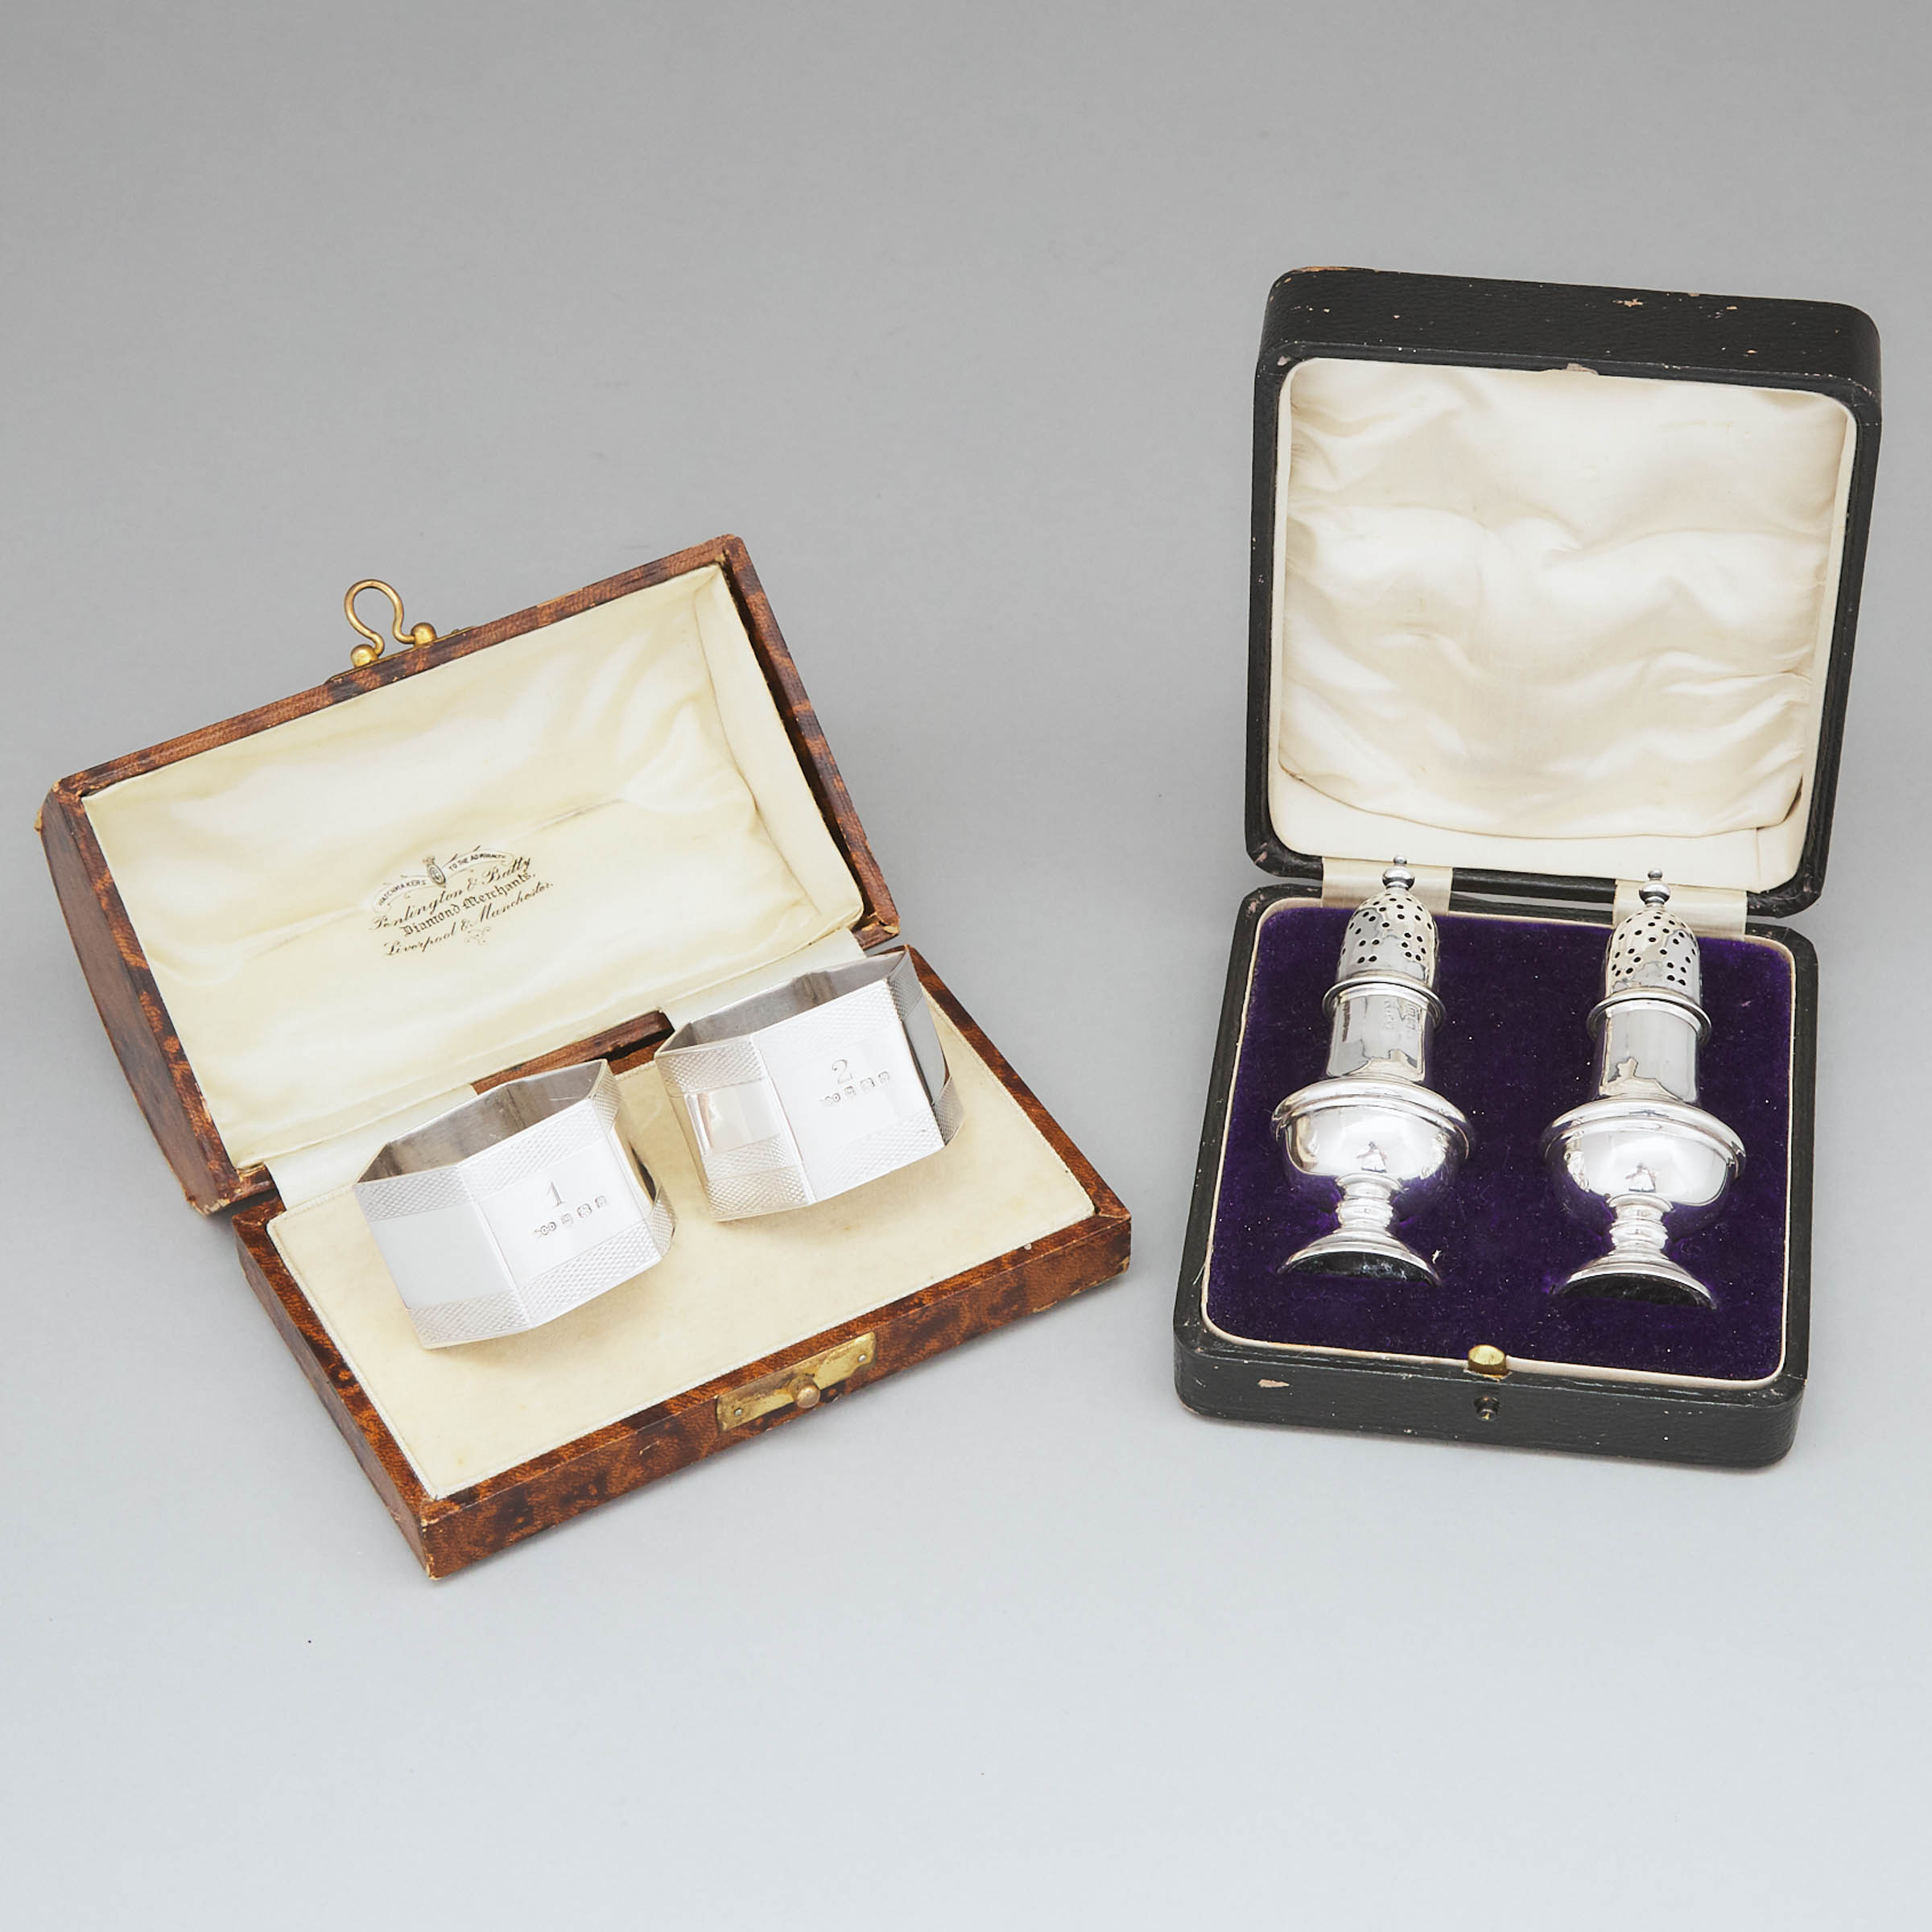 Pair of English Silver Hexagonal Napkin Rings, Henry Clifford Davies, Birmingham, 1934 and a Pair of Pepper Casters, Adie & Lovekin, 1912